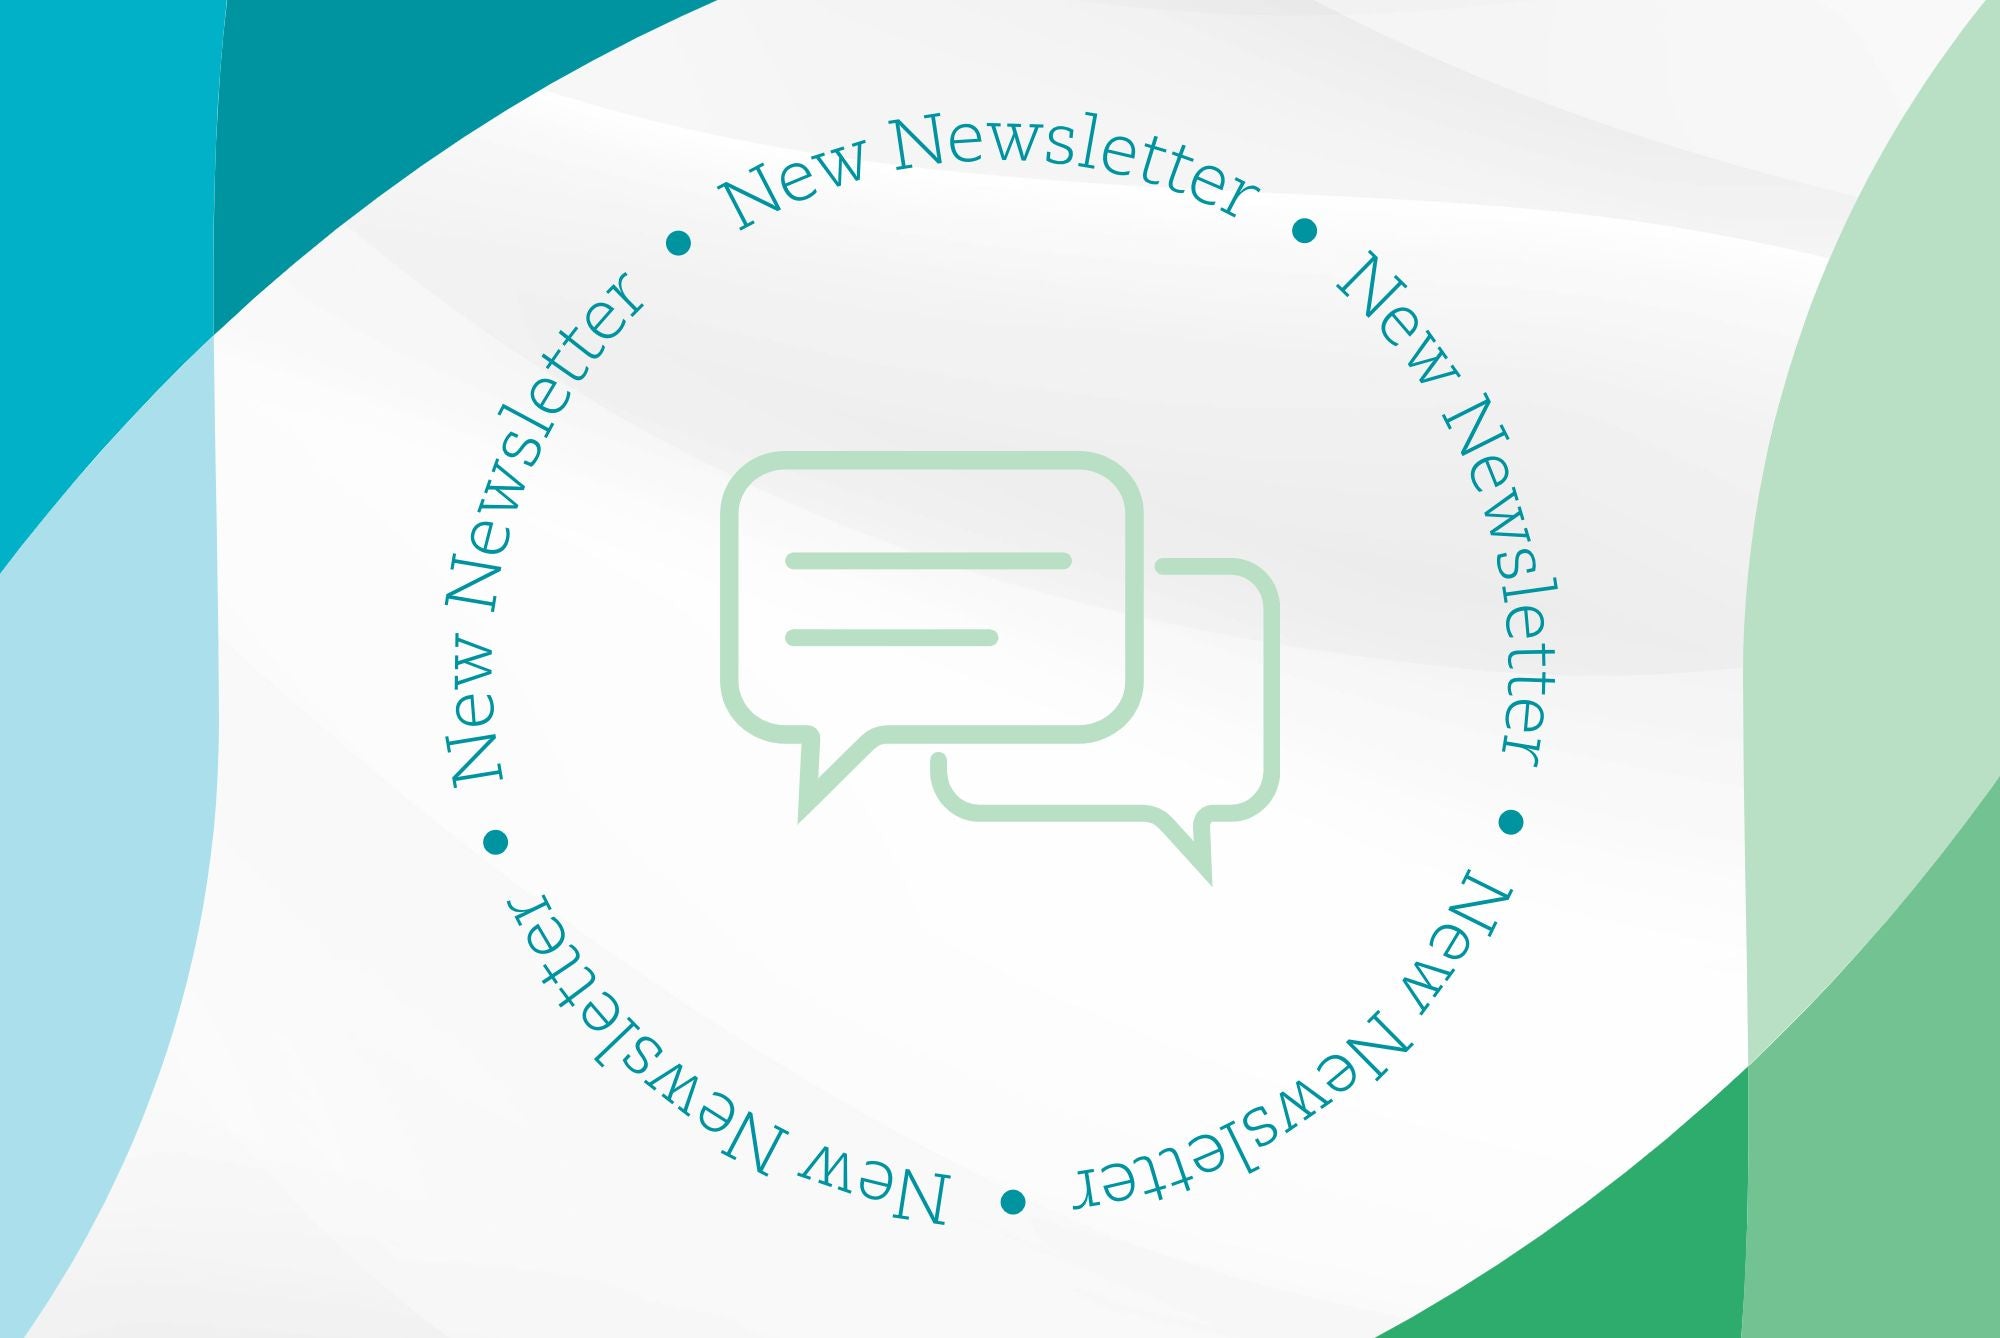 Our NCC Newsletter has just arrived!